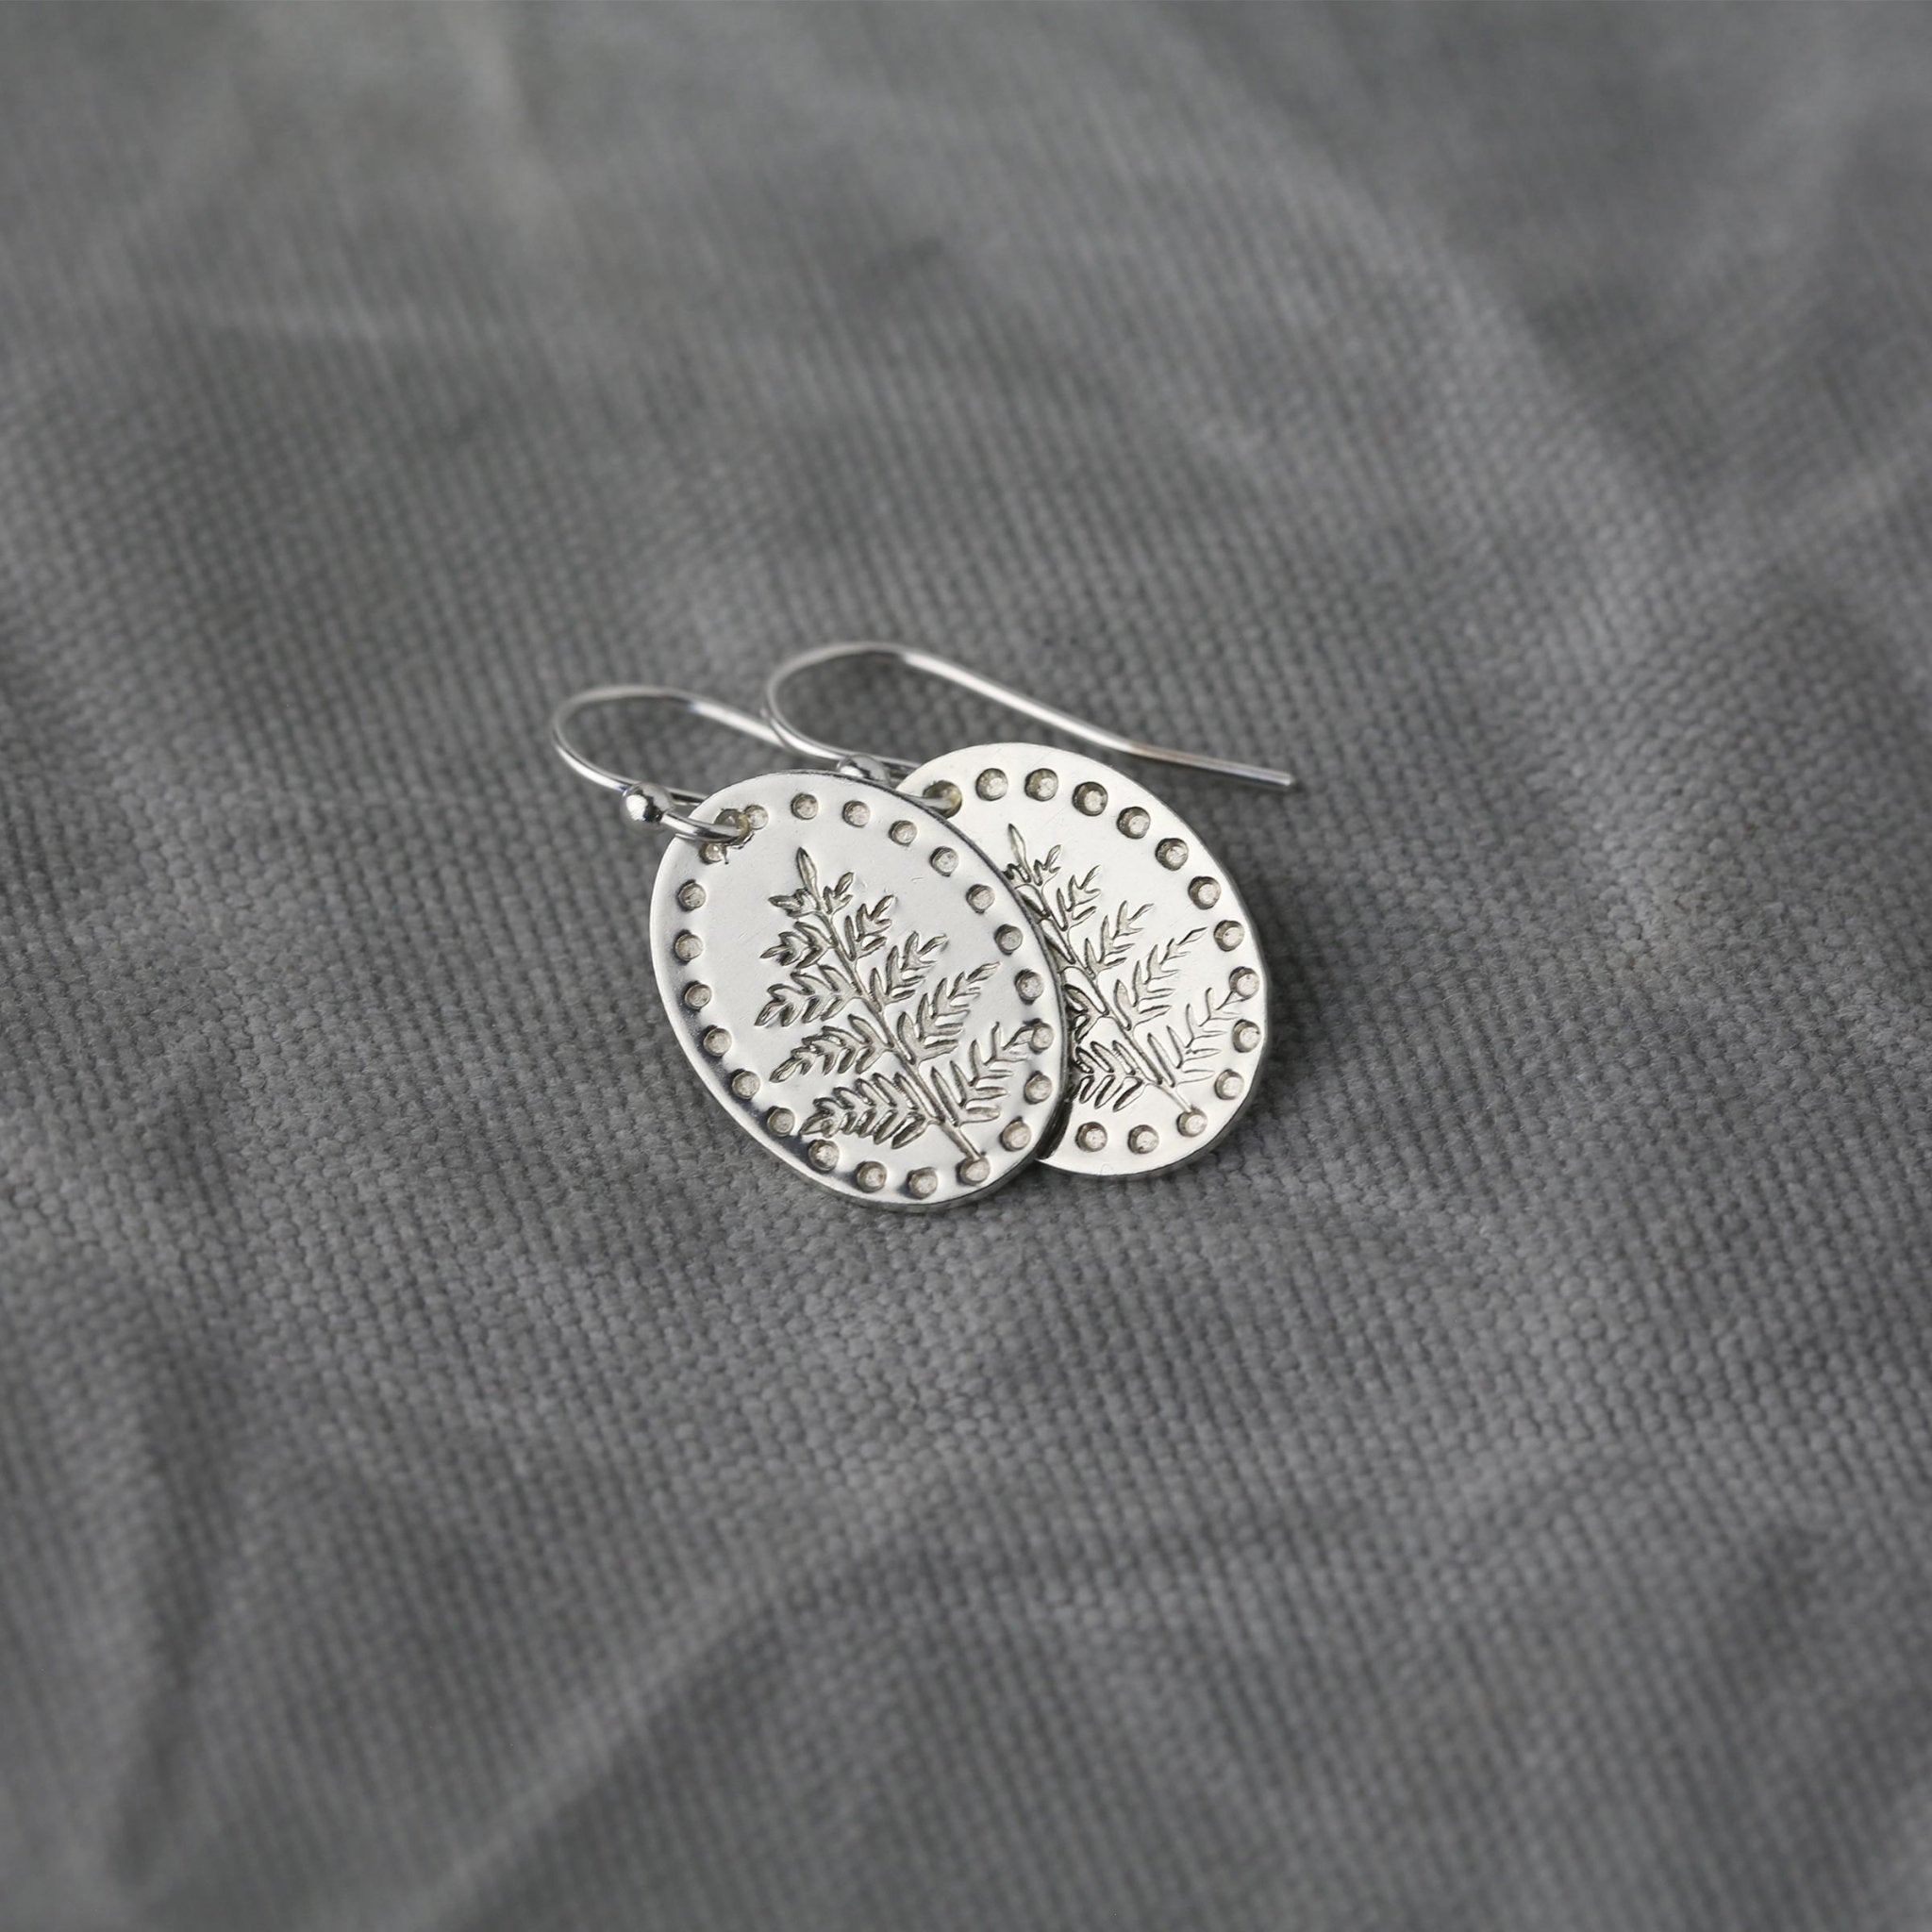 Silver Oval Stamped Leaf Earrings handmade by Burnish